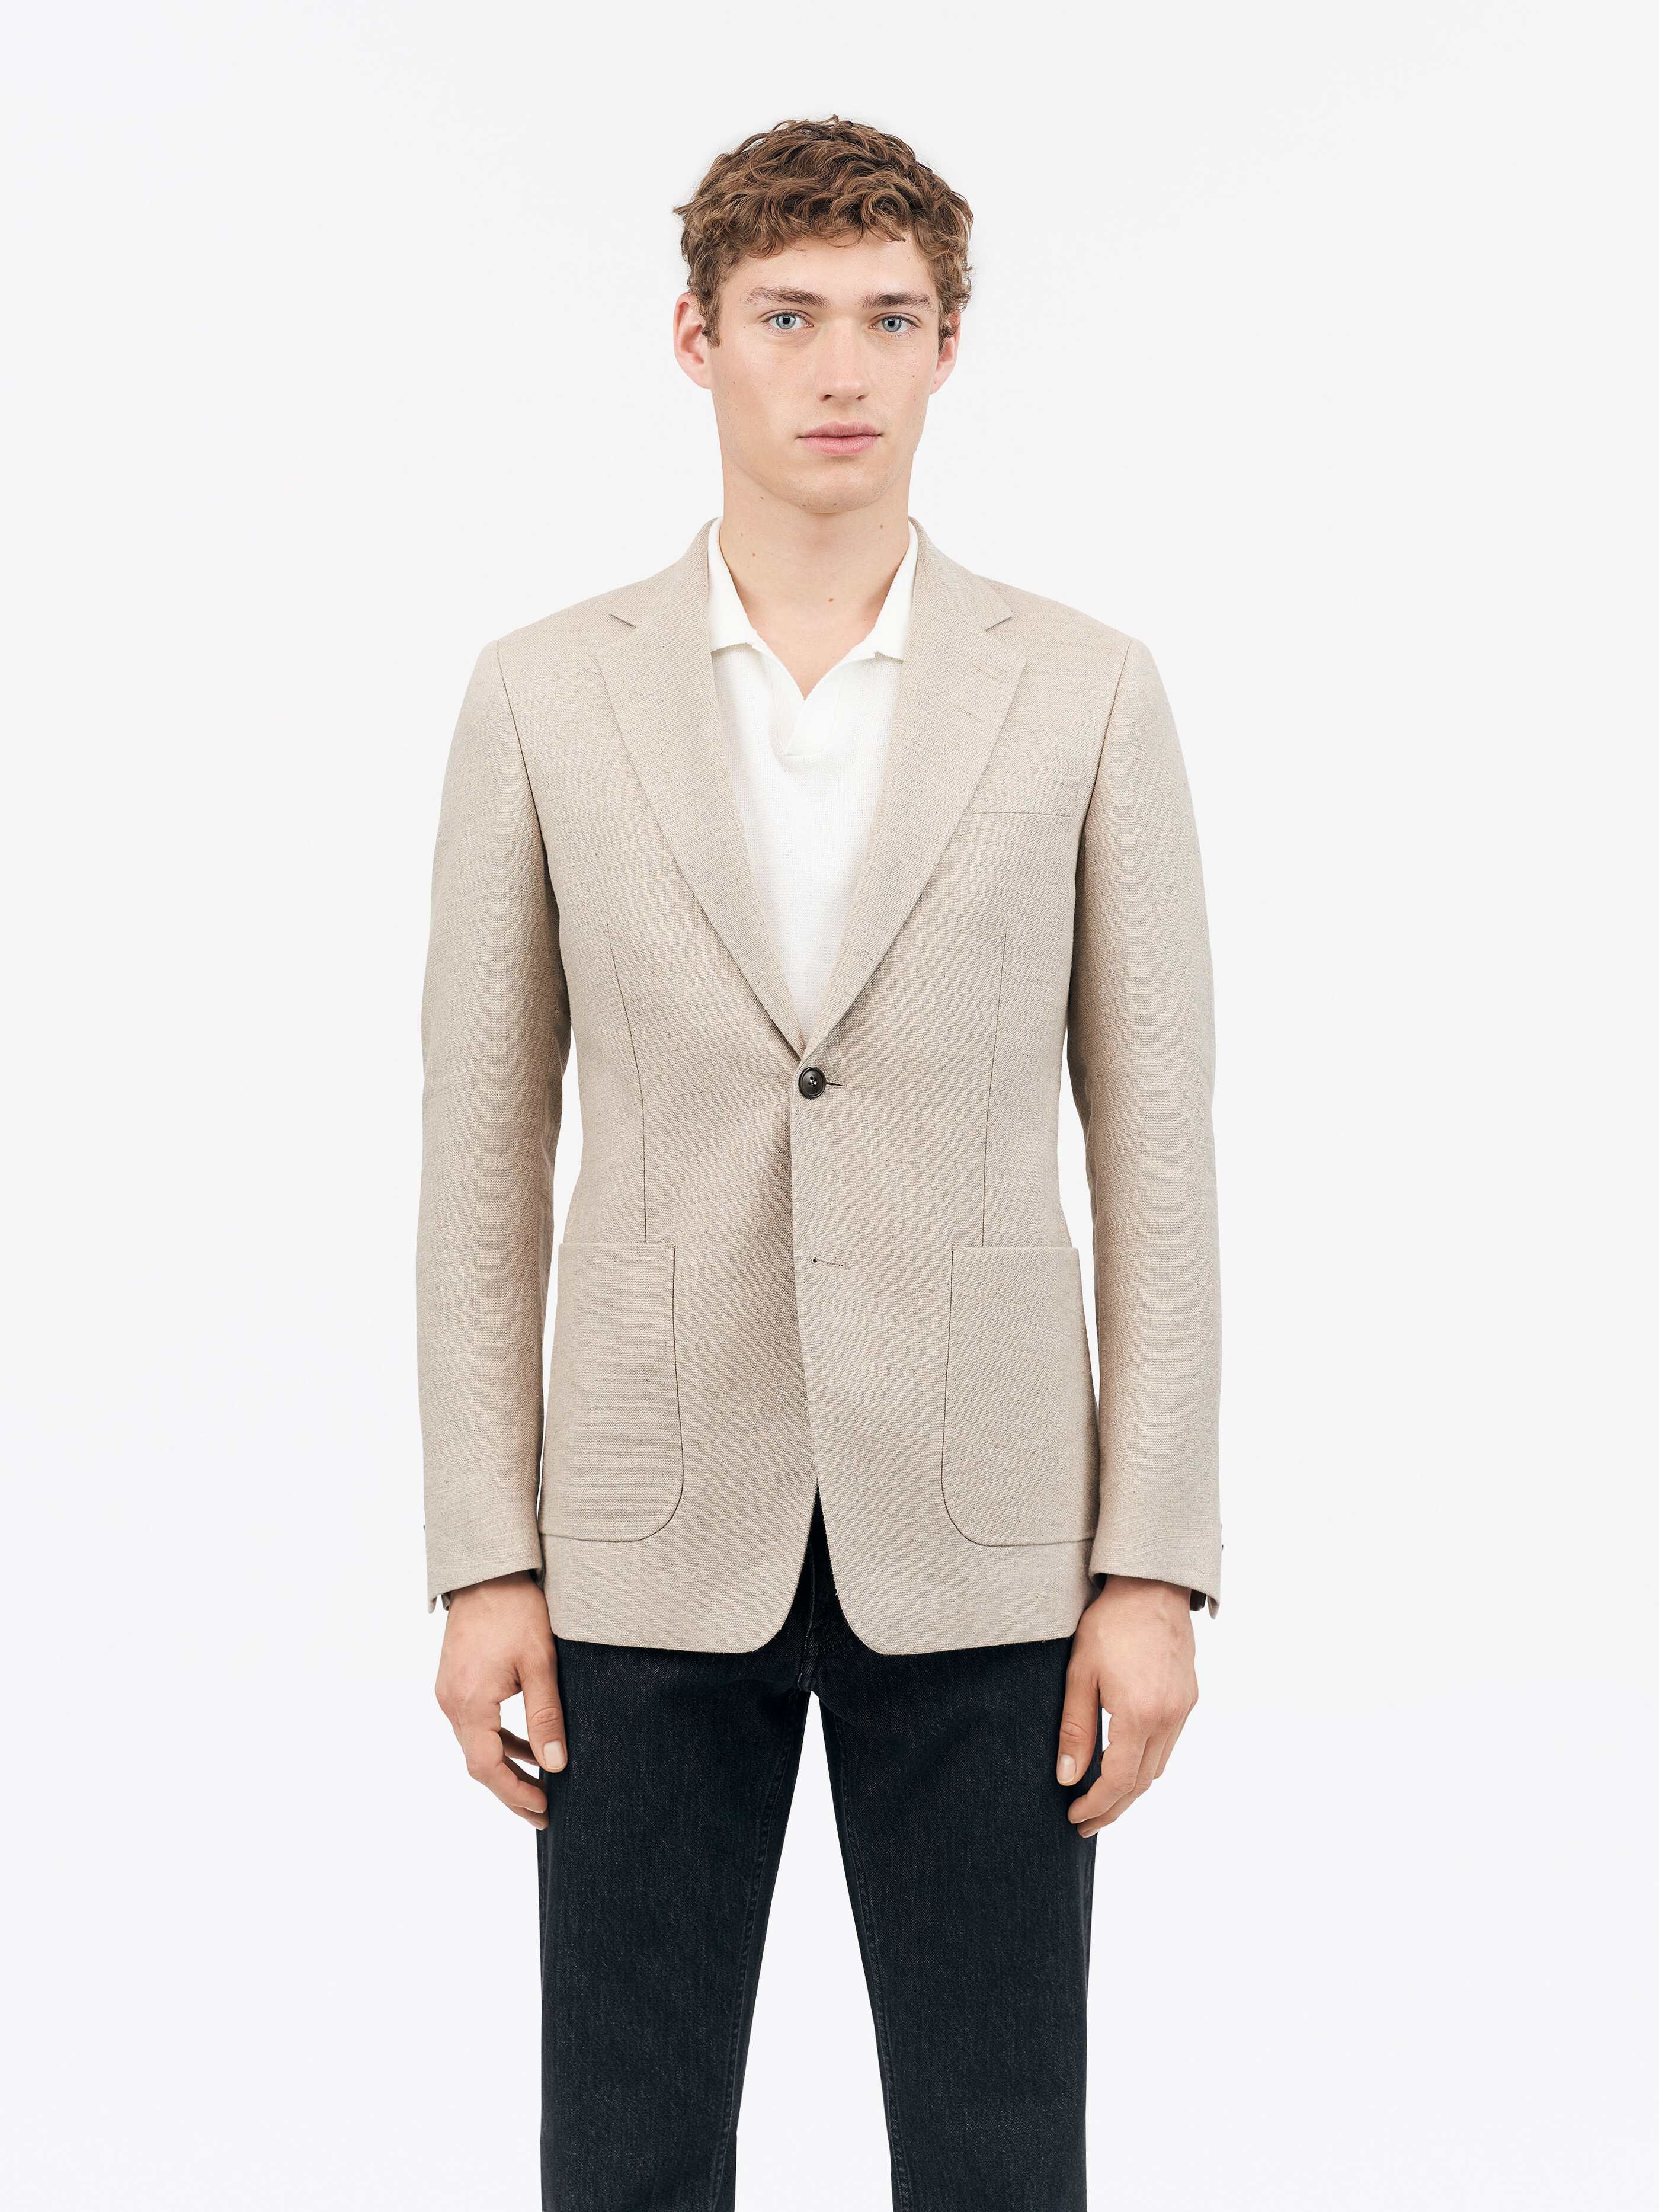 TIGER OF SWEDEN Justin HL Casual Blazer in Beige T70223005  | Shop from eightywingold an official brand partner for Tiger of Sweden Canada and US.